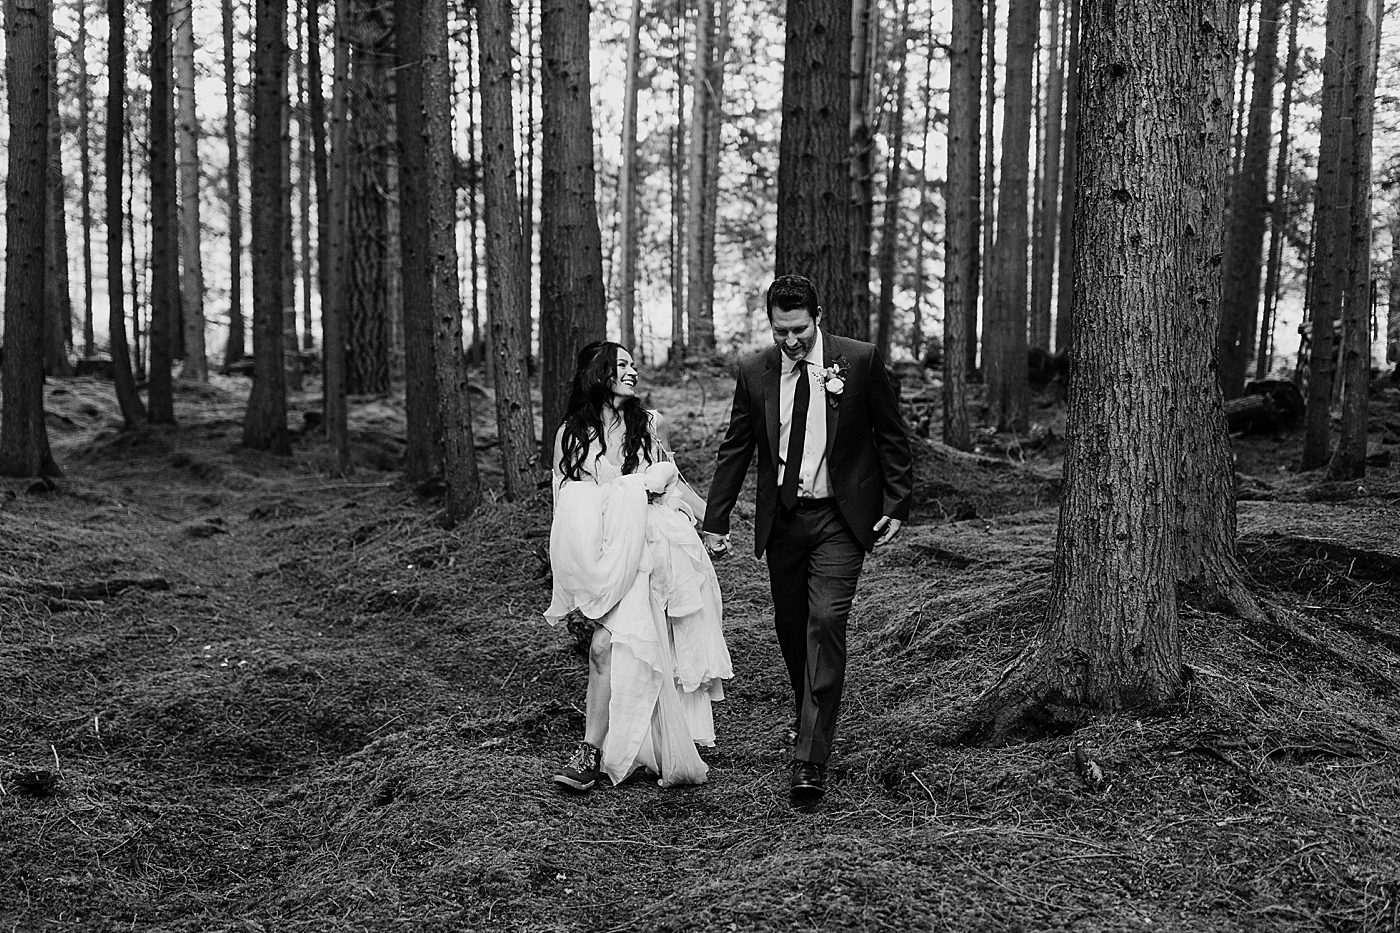 Adventure elopement at the Emerald Forest | Megan Montalvo Photography